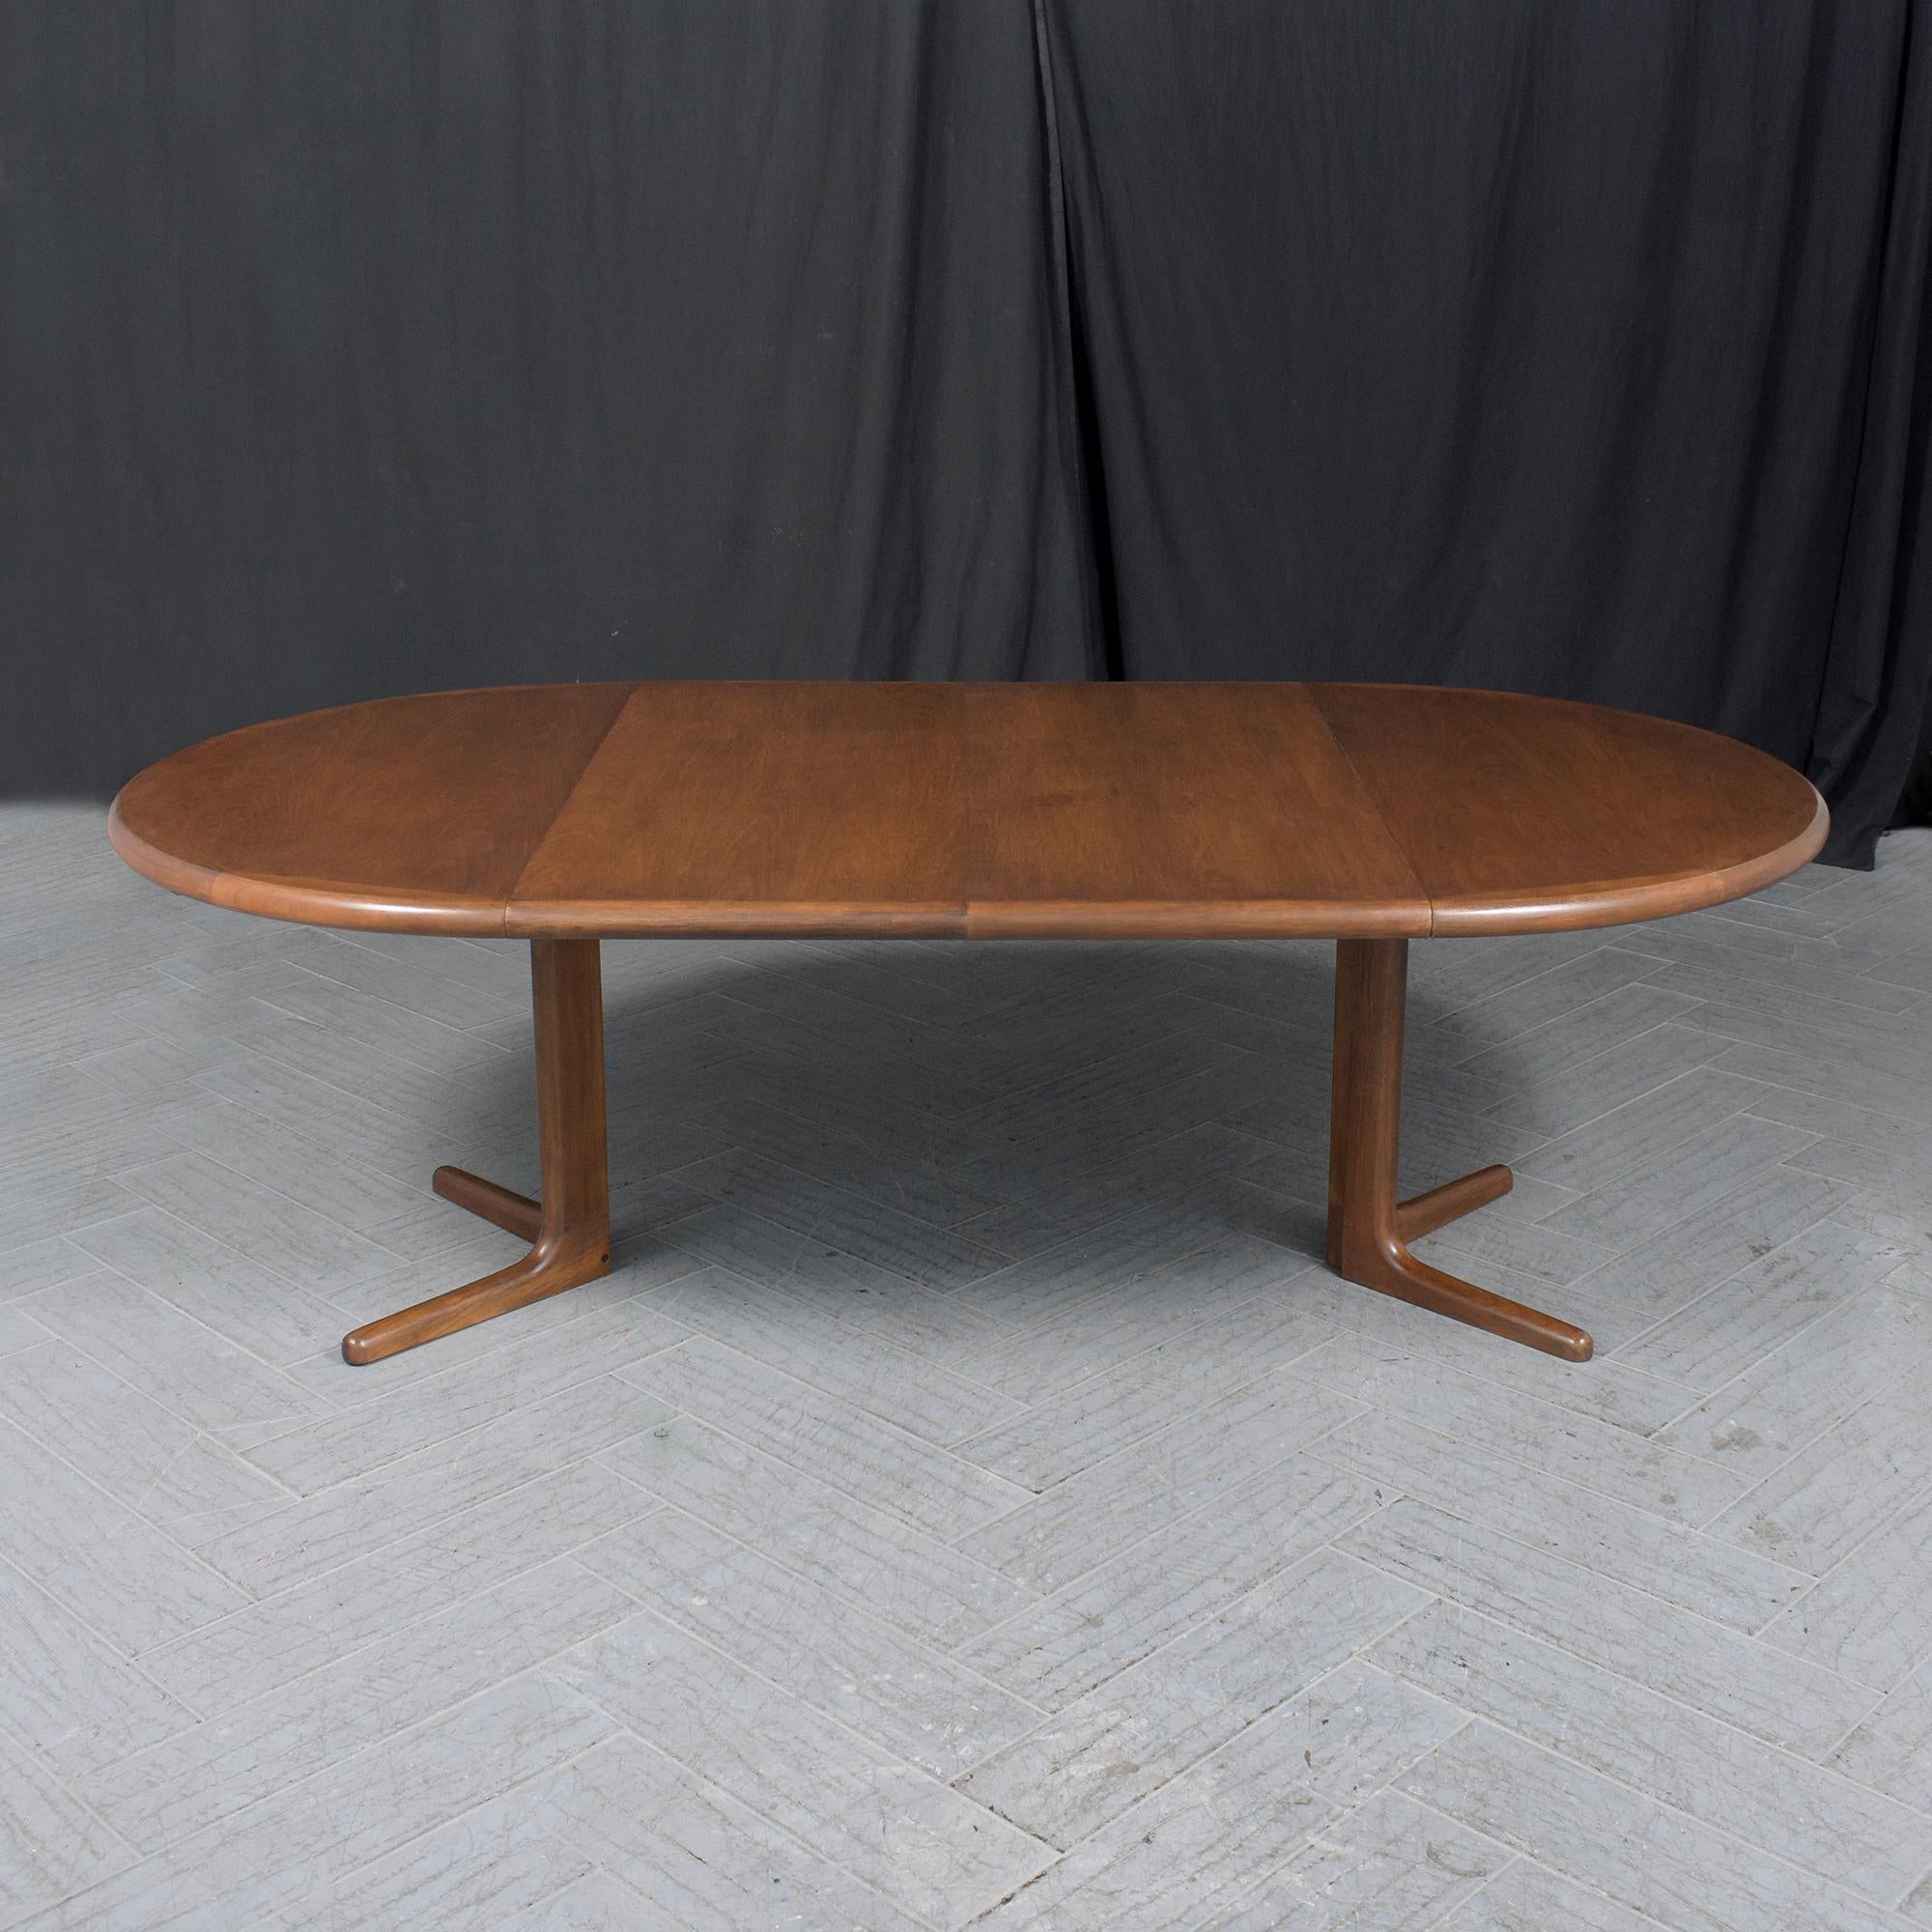 Enter the realm of classic Danish design with our exquisite vintage extendable dining table, a testament to the mid-century modern ethos. Expertly restored by our skilled in-house craftsmen, this teak table exudes style and quality. It boasts a